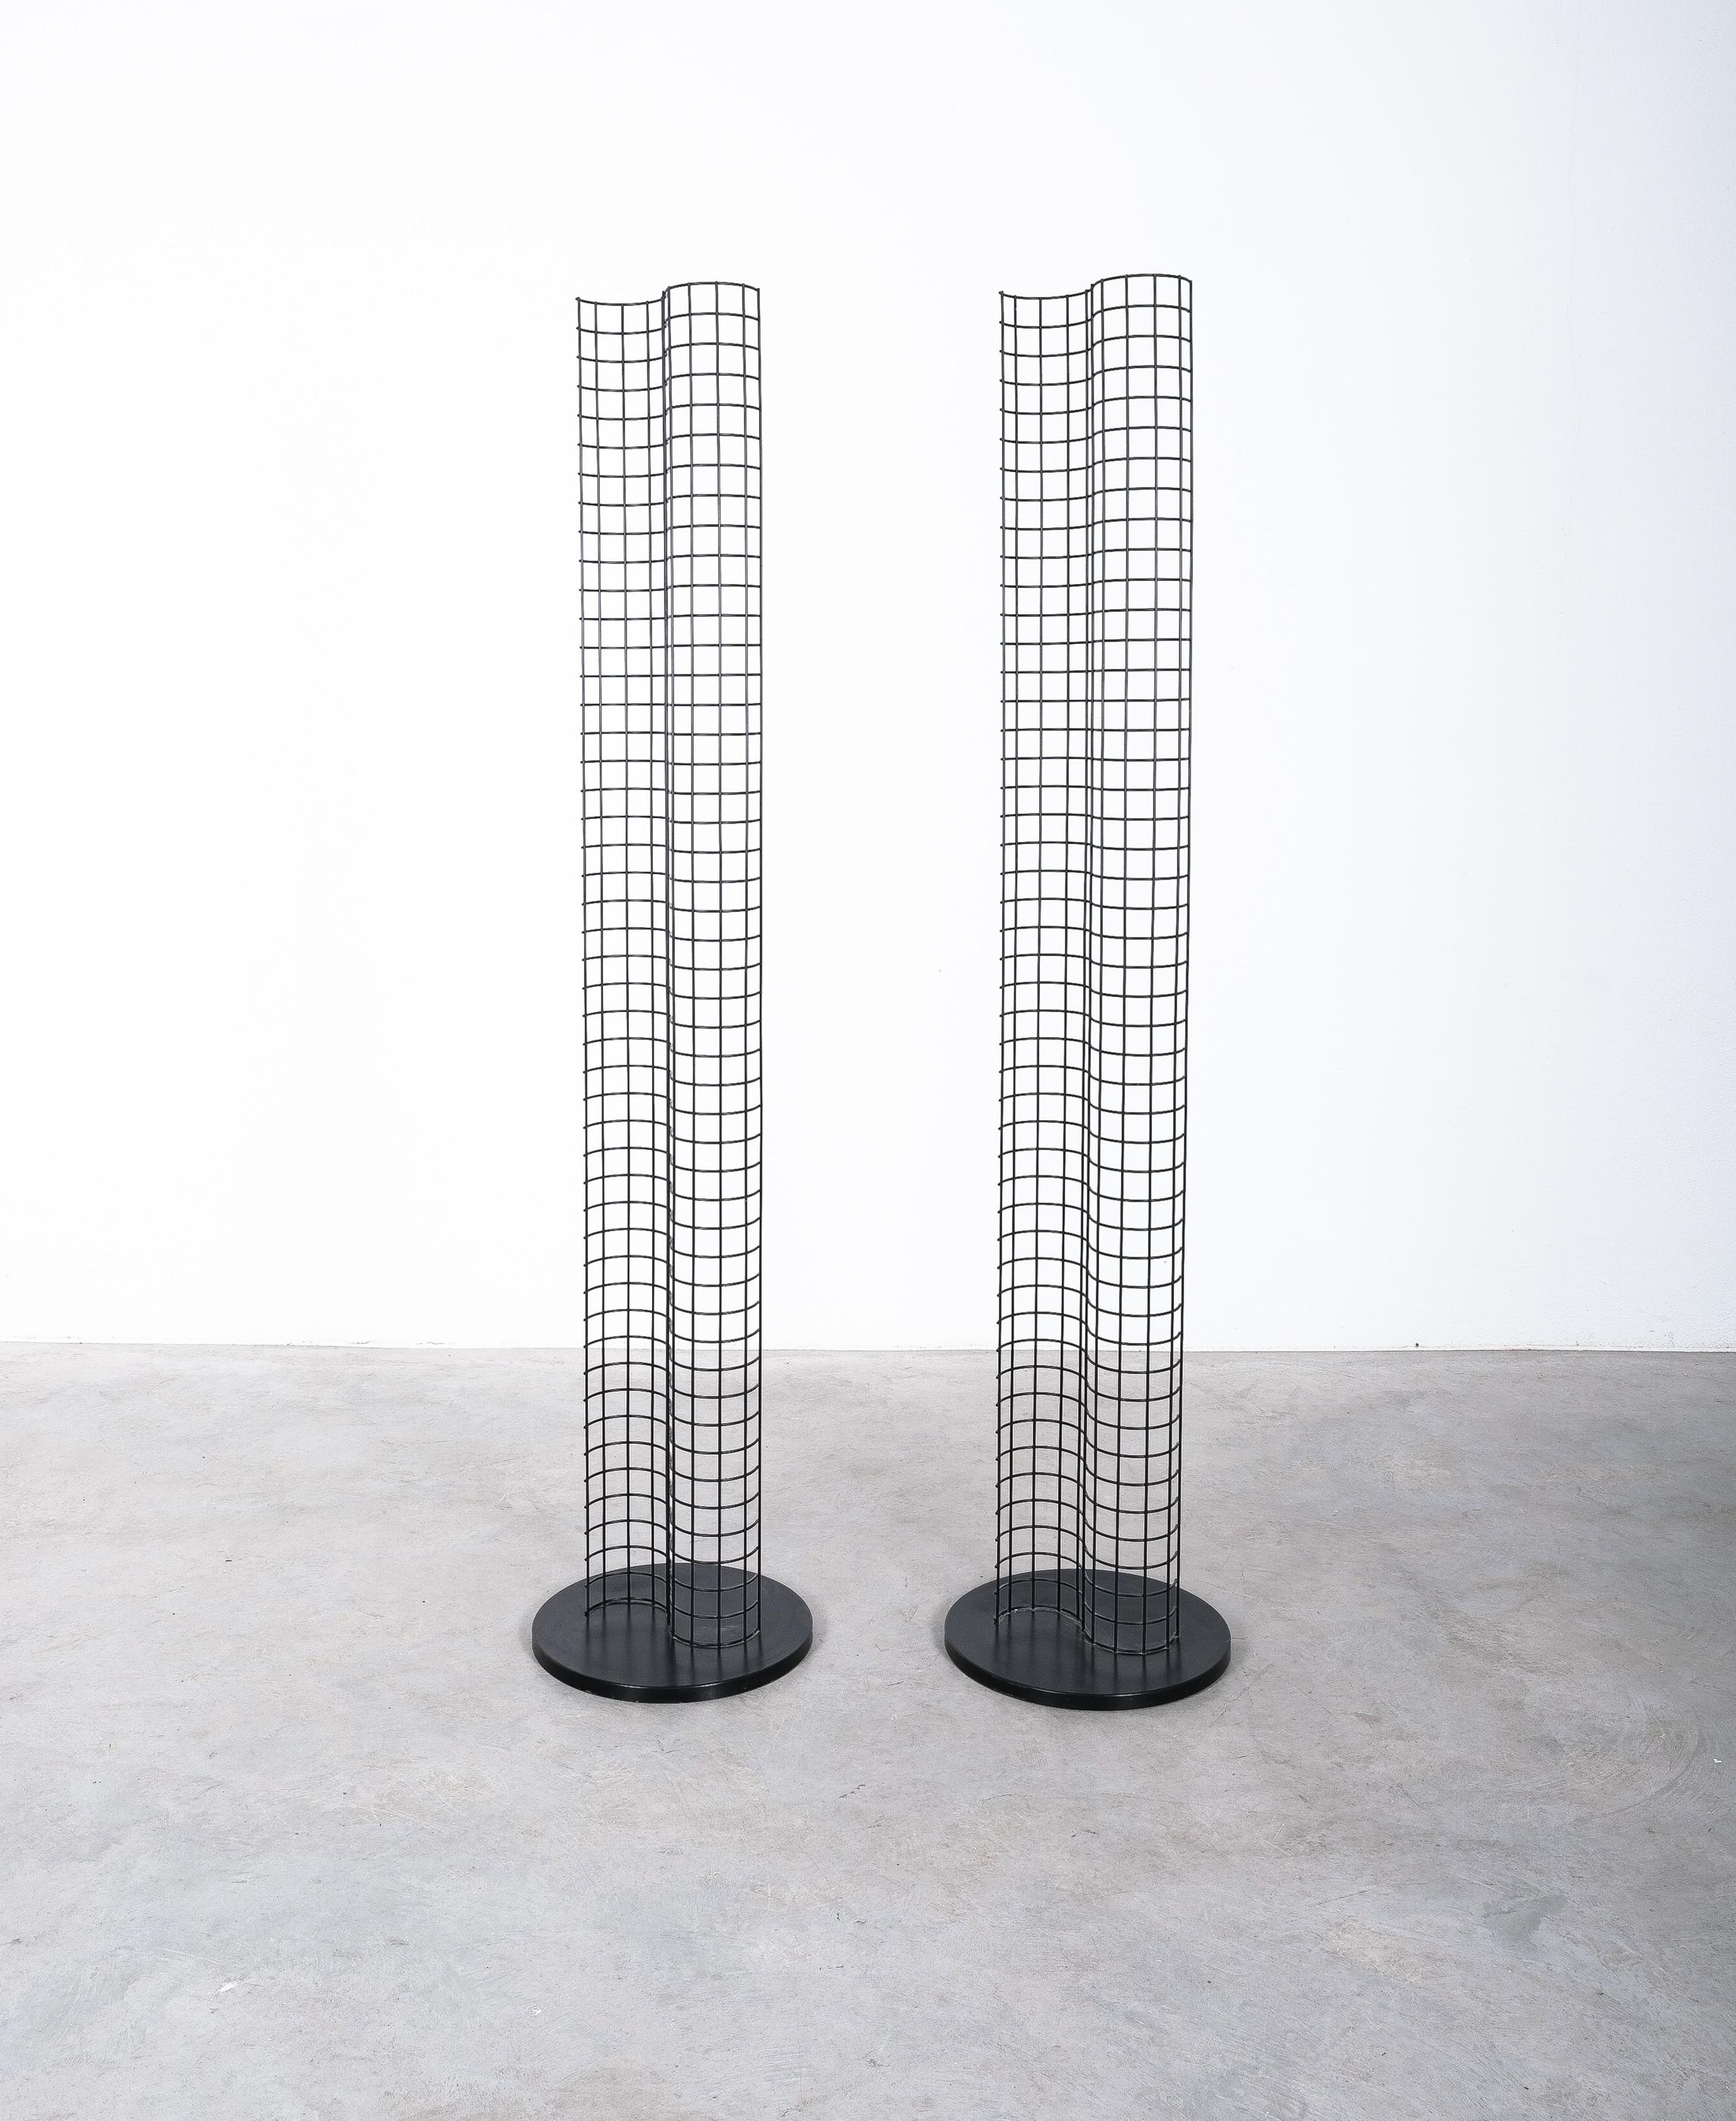 Lacquered Gianfranco Frattini Floor Lights '2' Opal Glass Grid Black White, Italy, 1970 For Sale